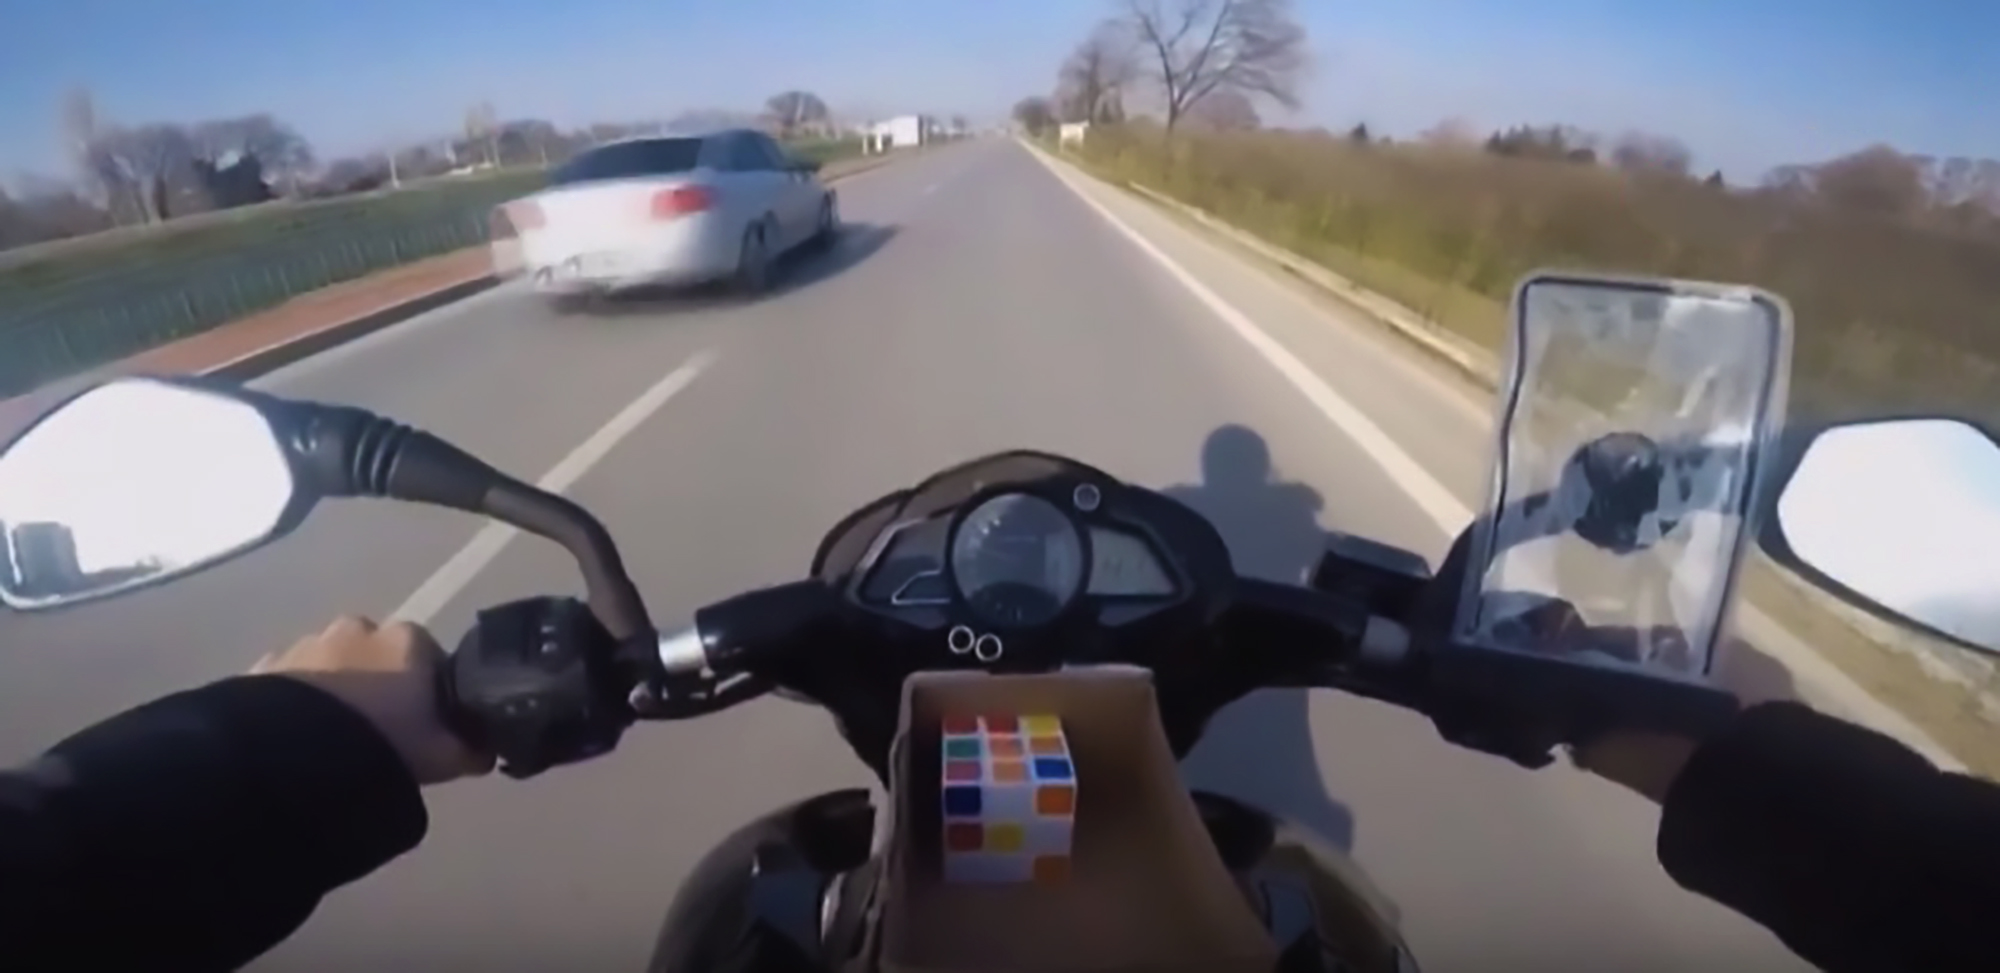 Read more about the article Motorbiker Solves Rubiks Cube While Riding In Traffic